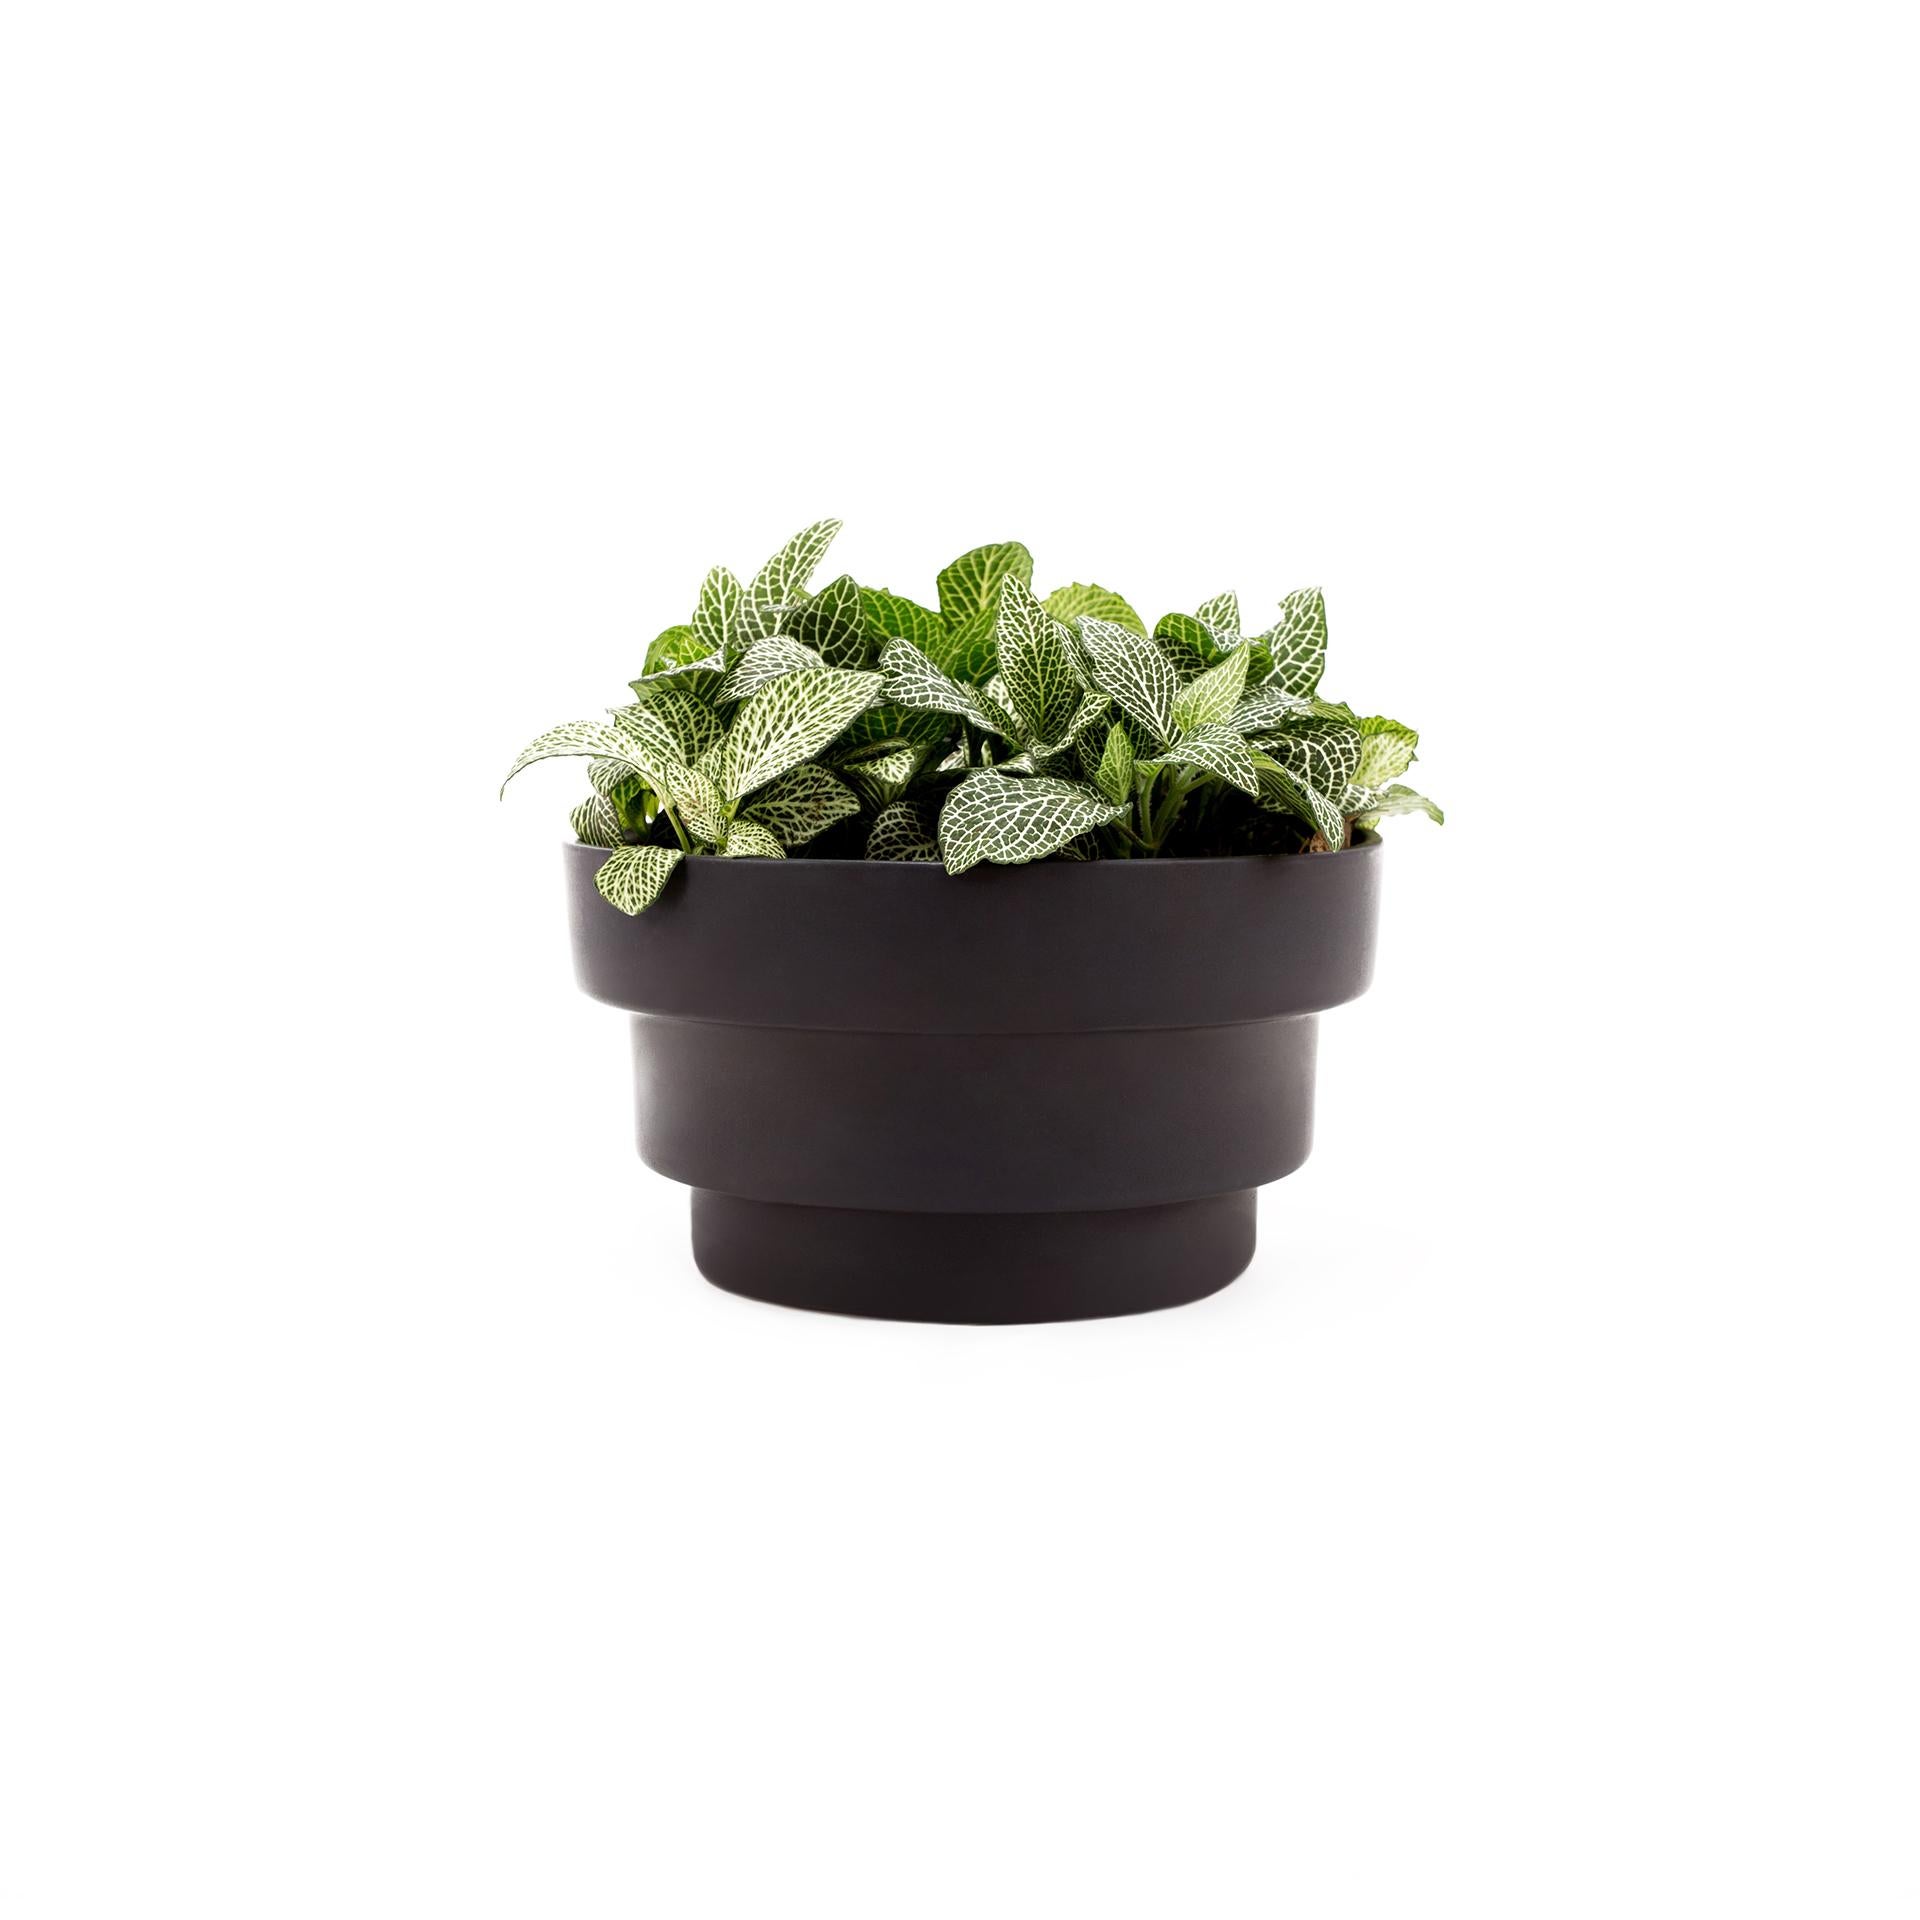 This piramyd shaped planter come in 2 different colors (black and terracotta) and can be used in 3 different ways, as a stand, on top of a counter or table, and suspended by a cotton chord. The use depends on how the user interacts with the space